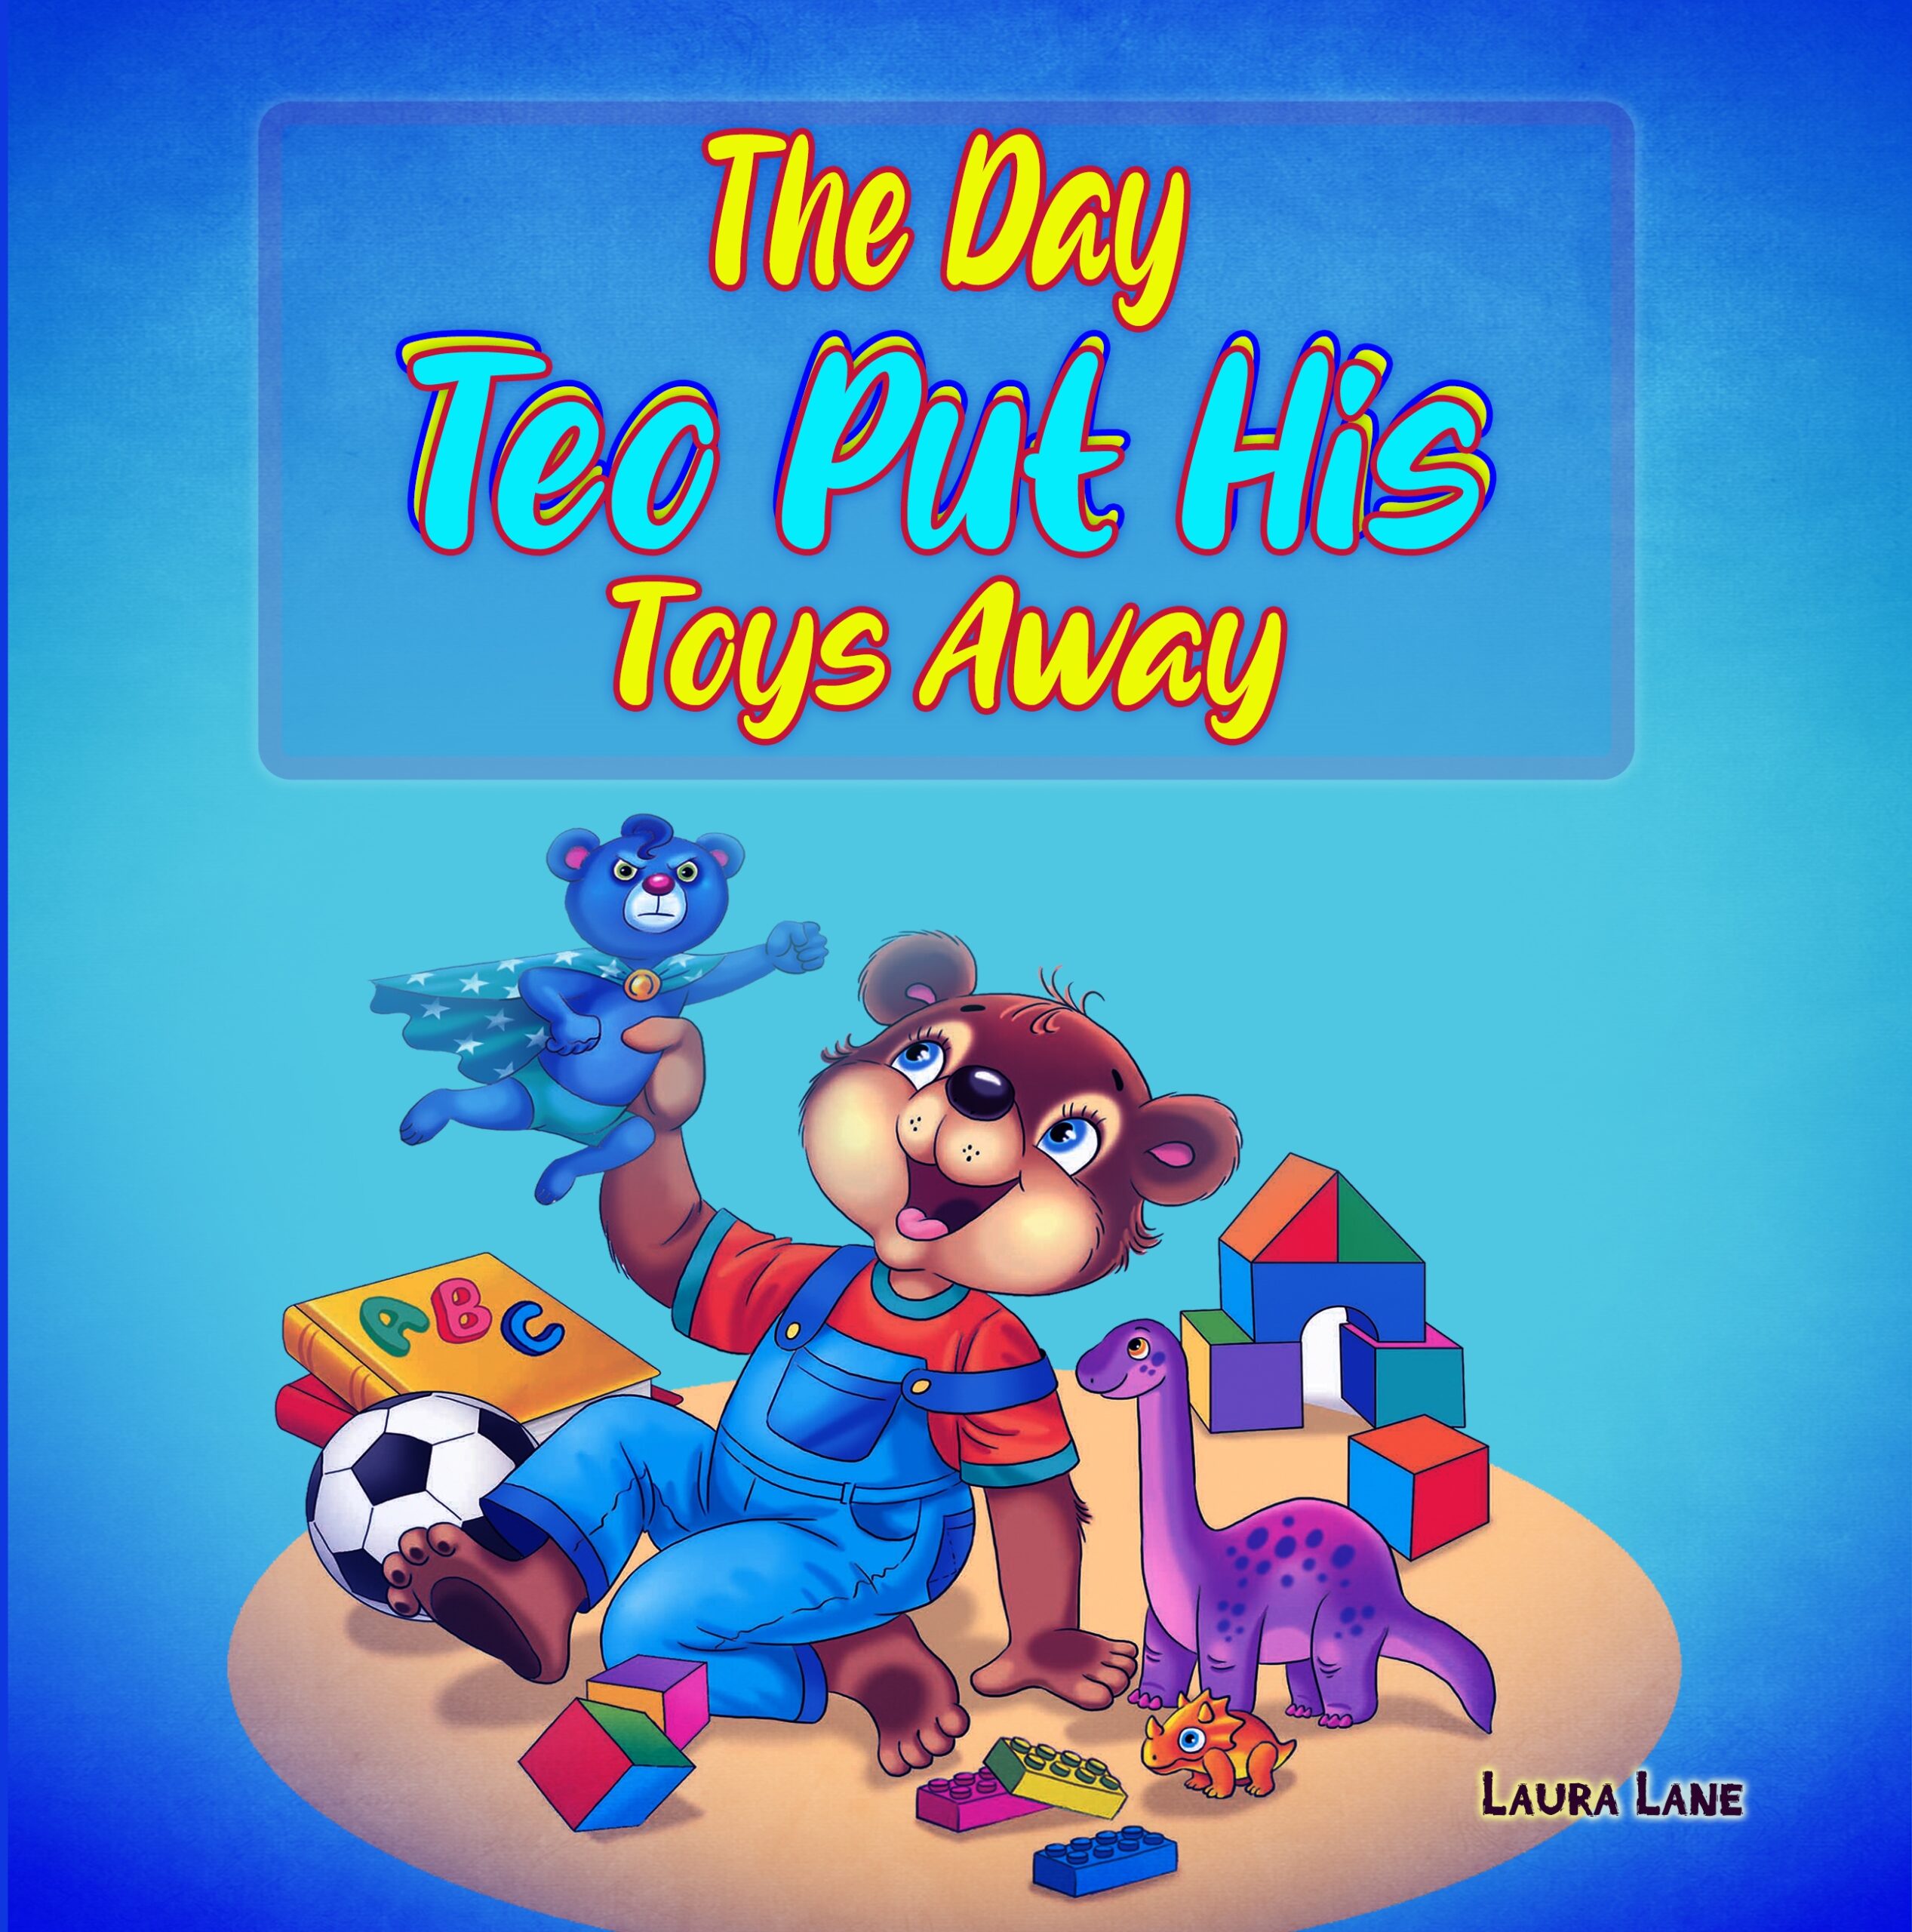 FREE: The Day Teo Put His Toys Away by Laura Lane